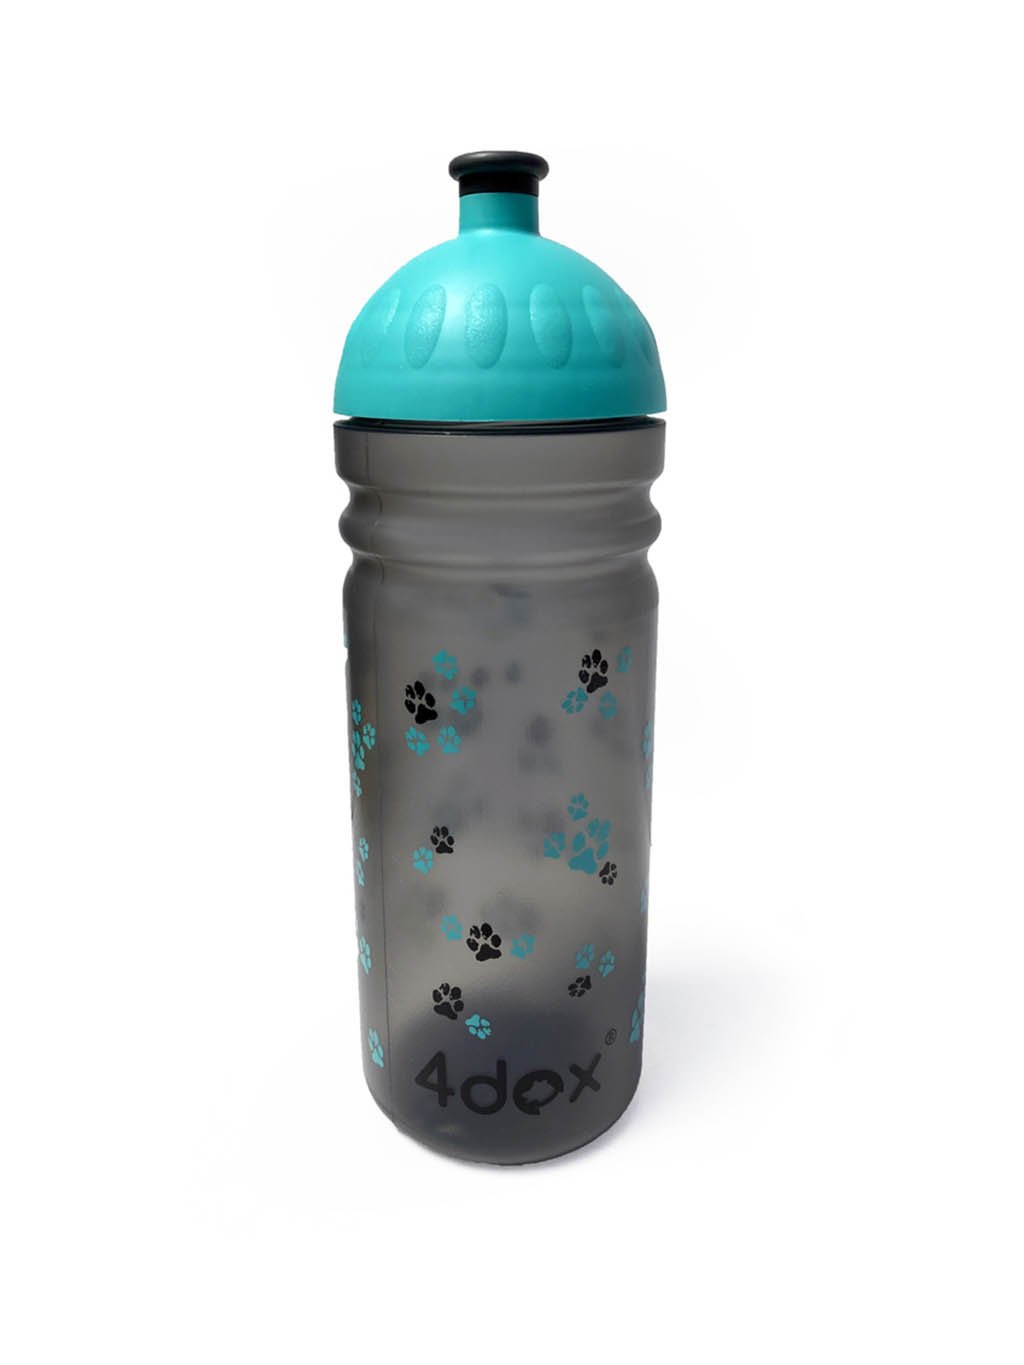 Bottle with turquoise paws